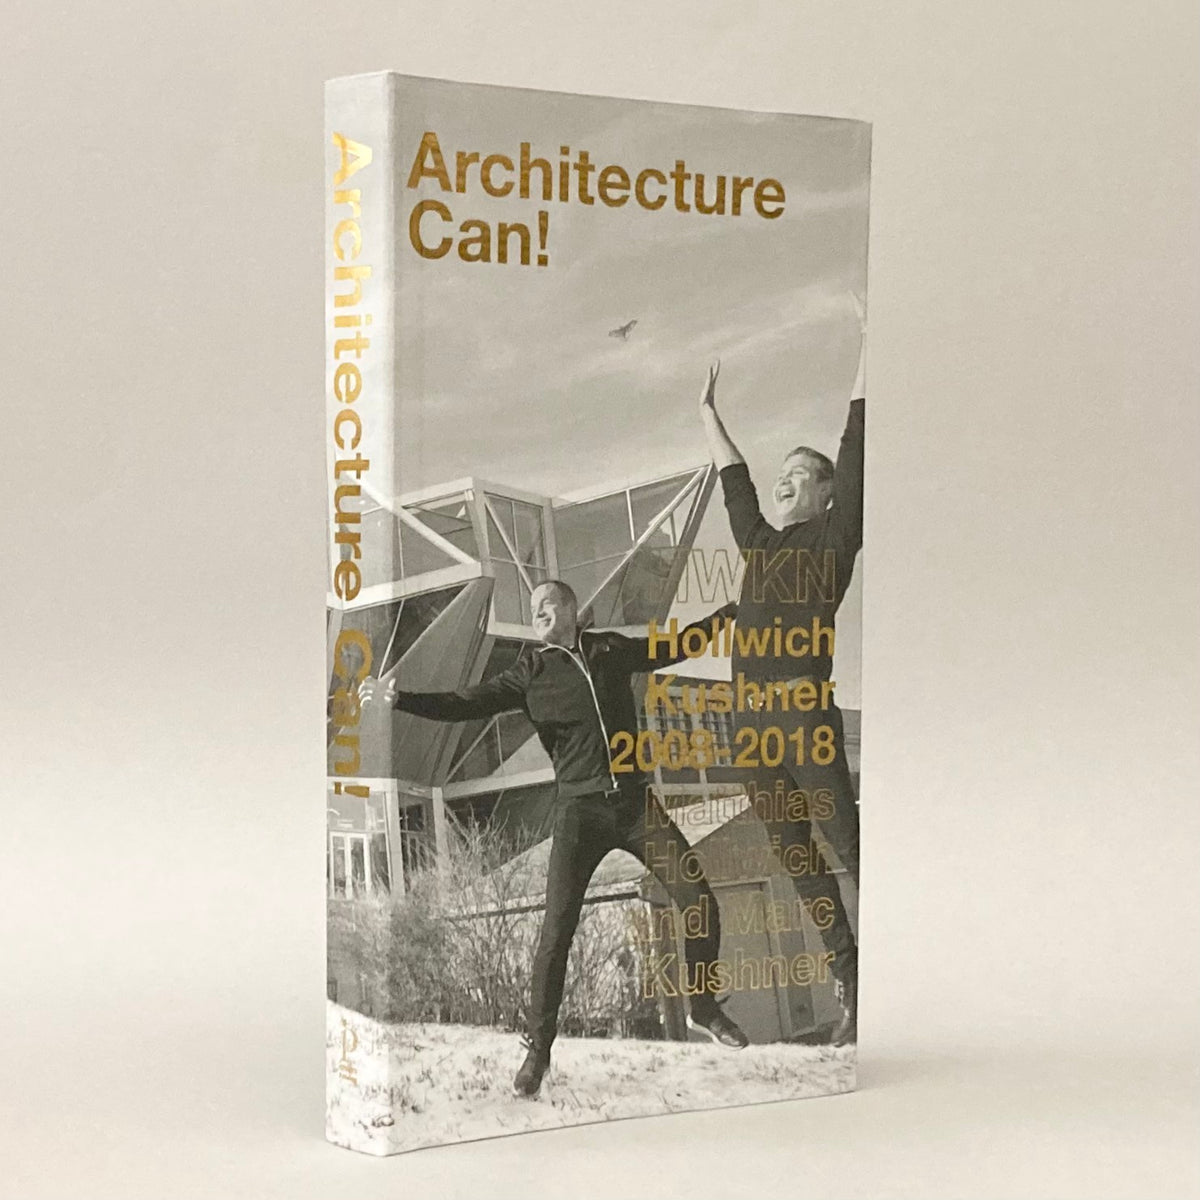 Architecture Can!: HWKN Hollwich Kushner 2008-2018